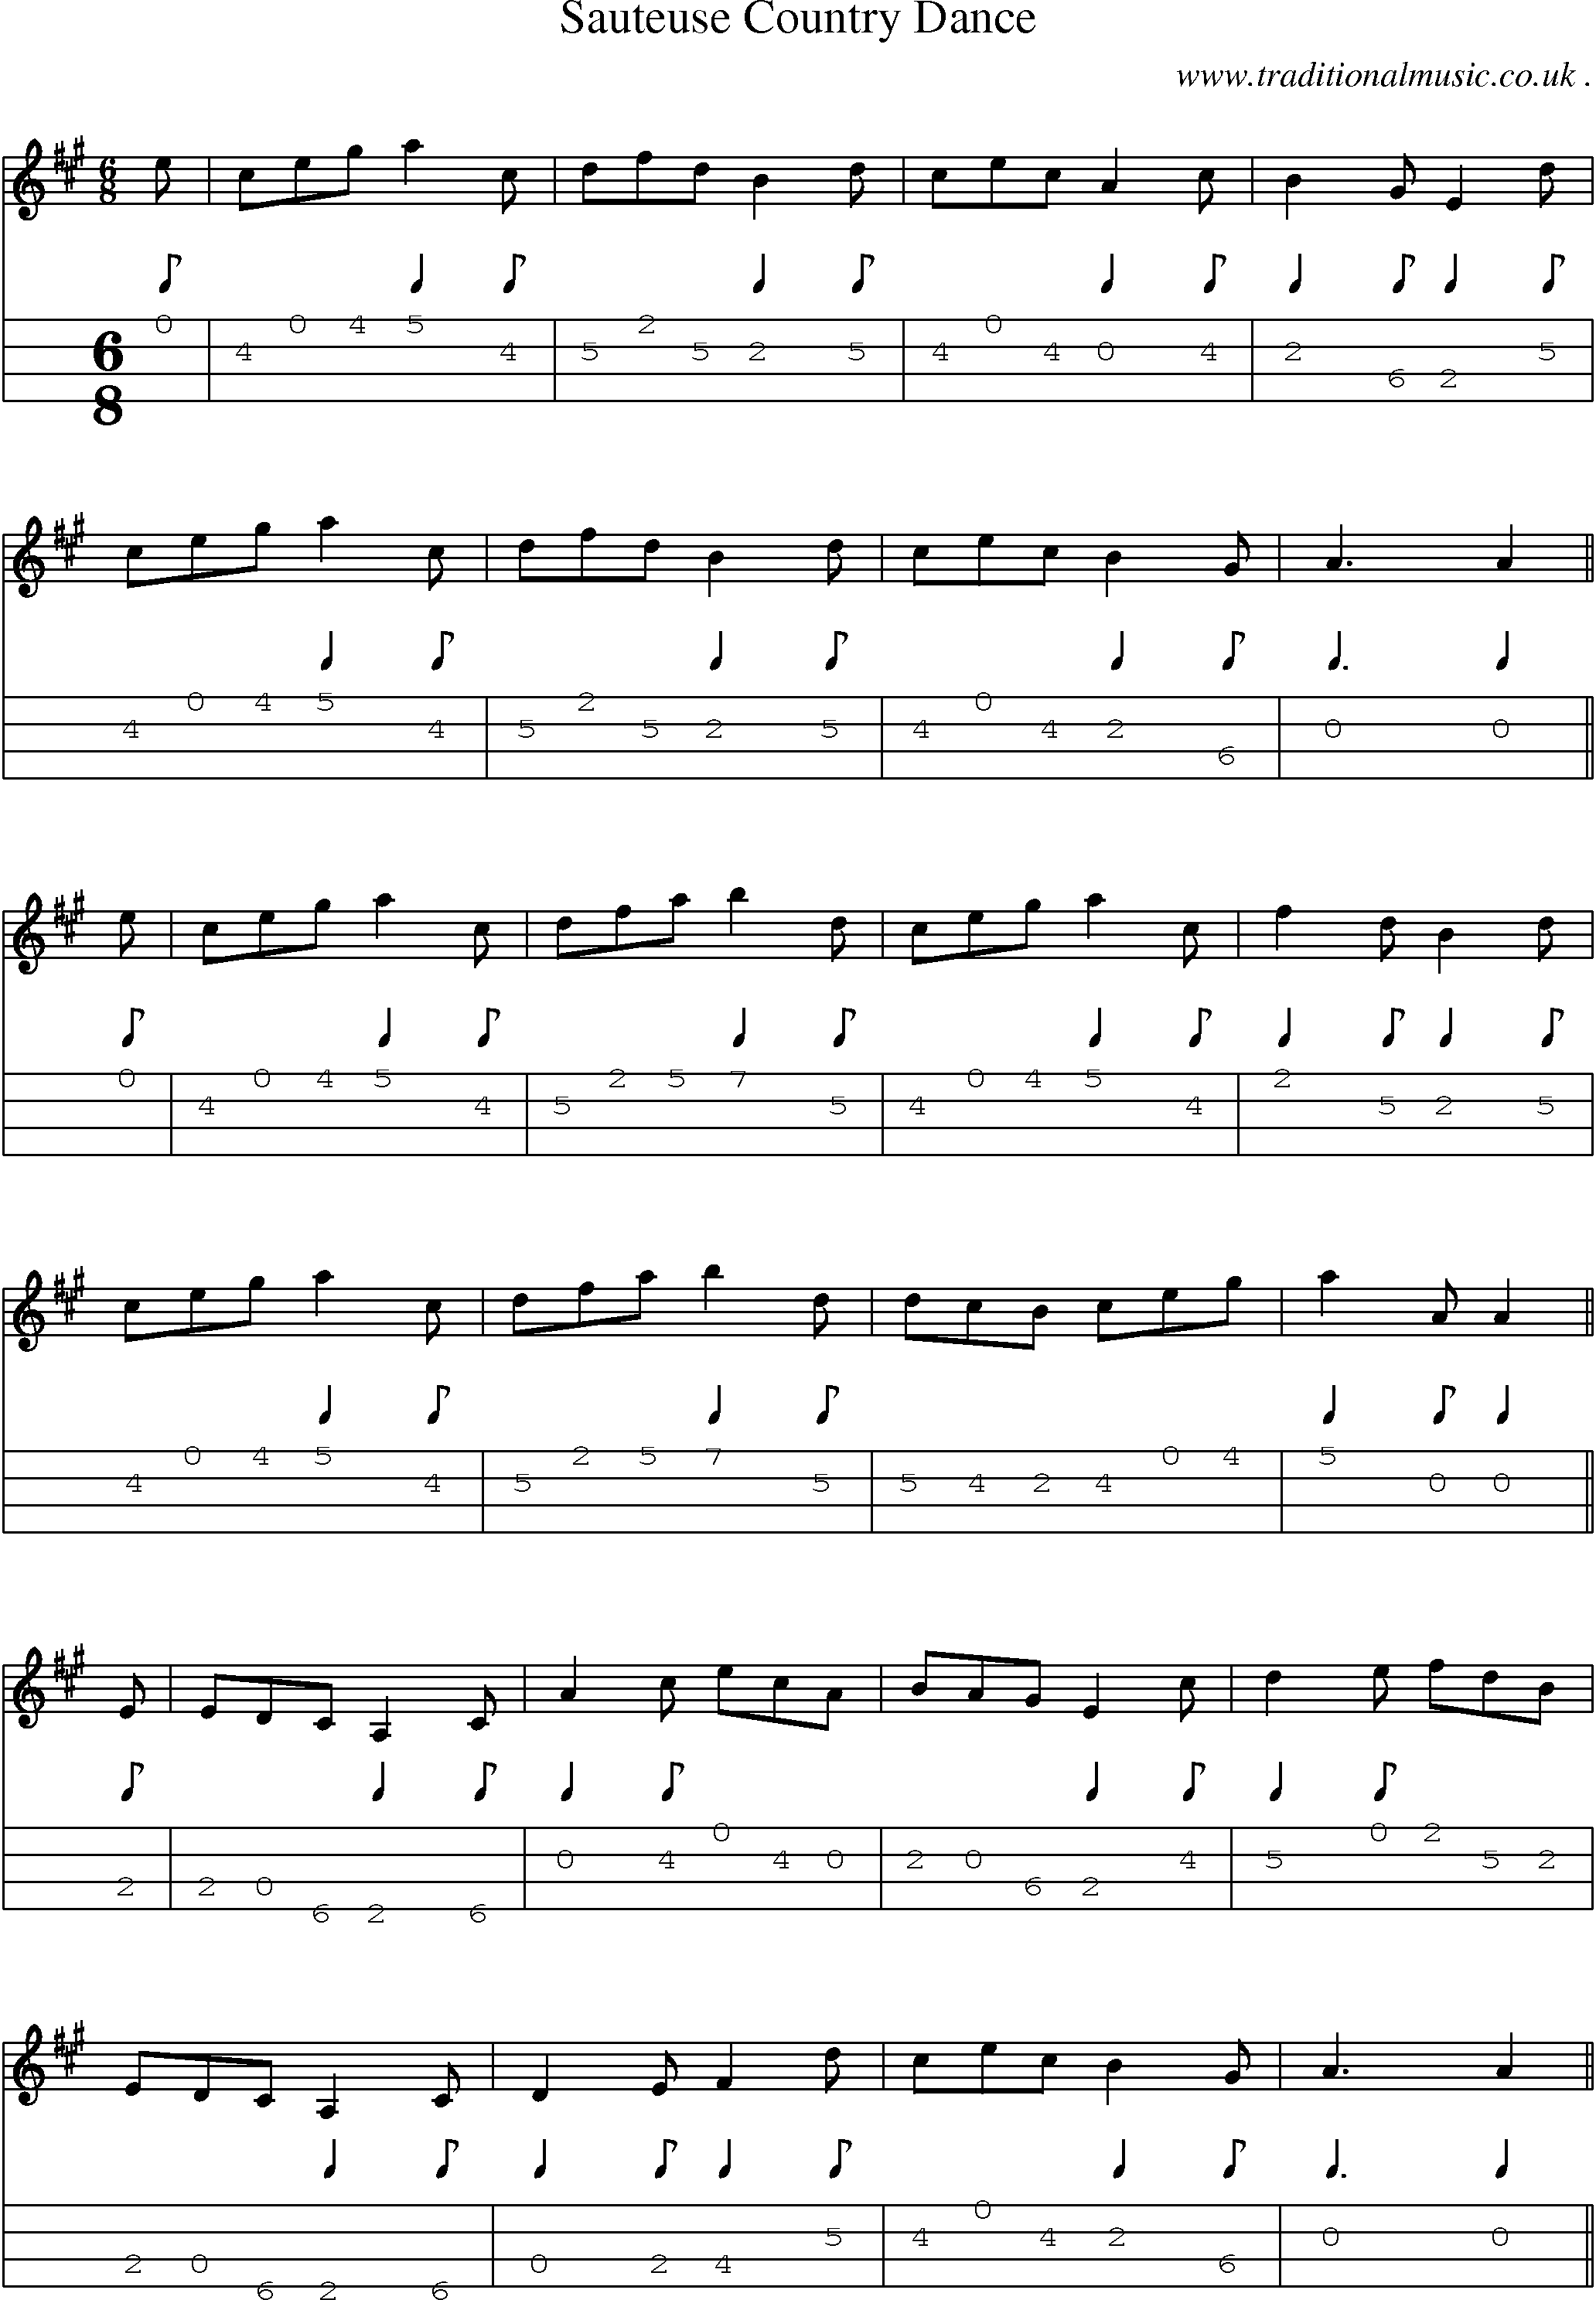 Sheet-Music and Mandolin Tabs for Sauteuse Country Dance